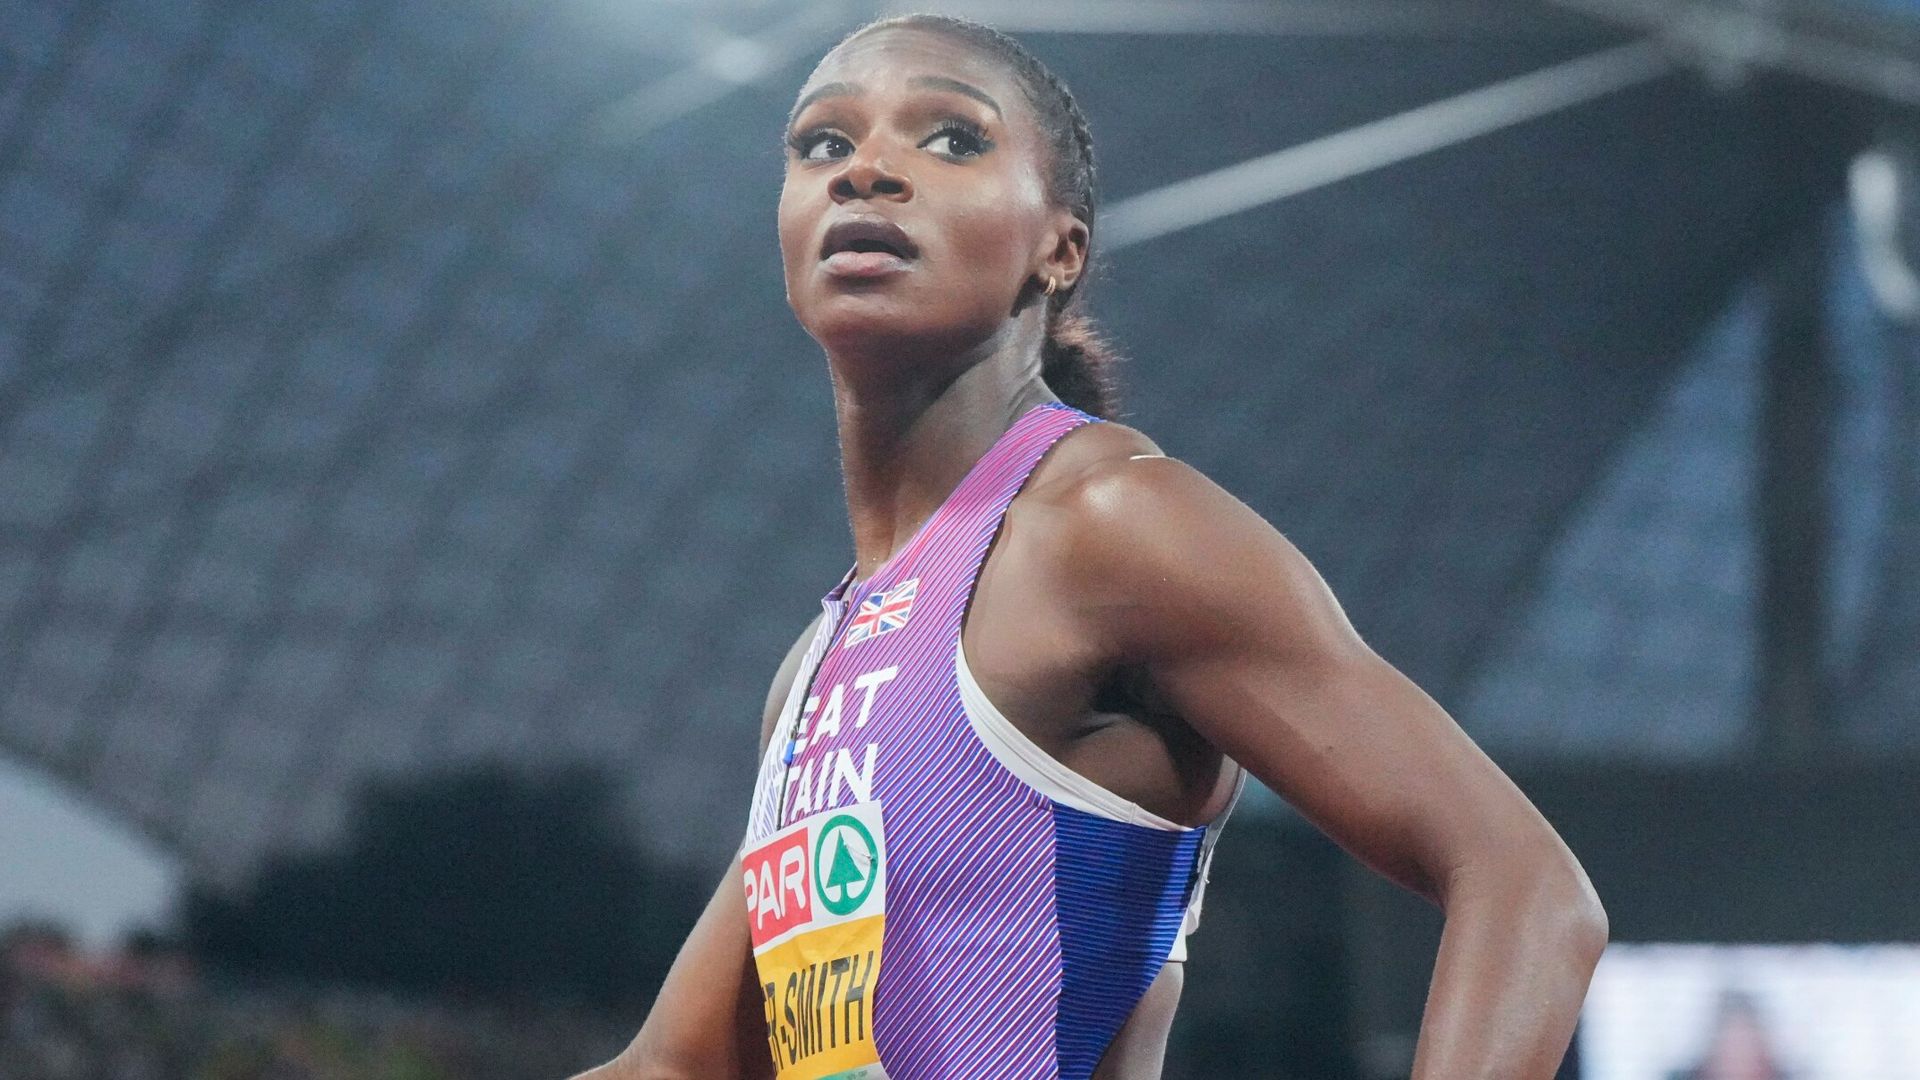 Asher-Smith calls for more research on impact of menstrual cycle on performance